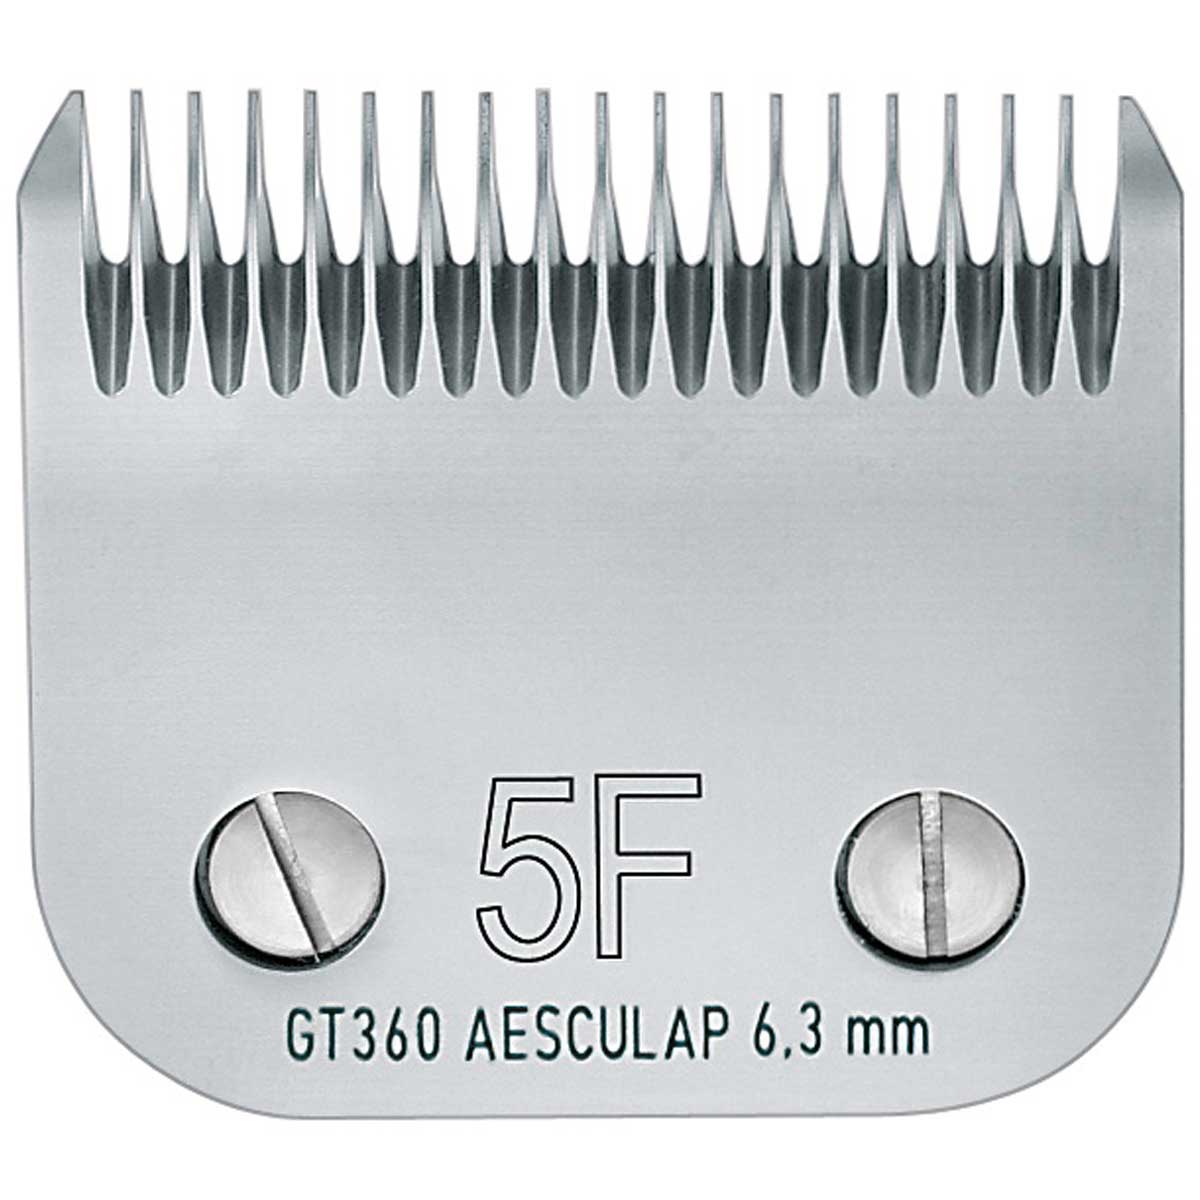 Aesculap Clipper Blade SnapOn 6,3 mm, GT360 #5F (Fine cutting set)